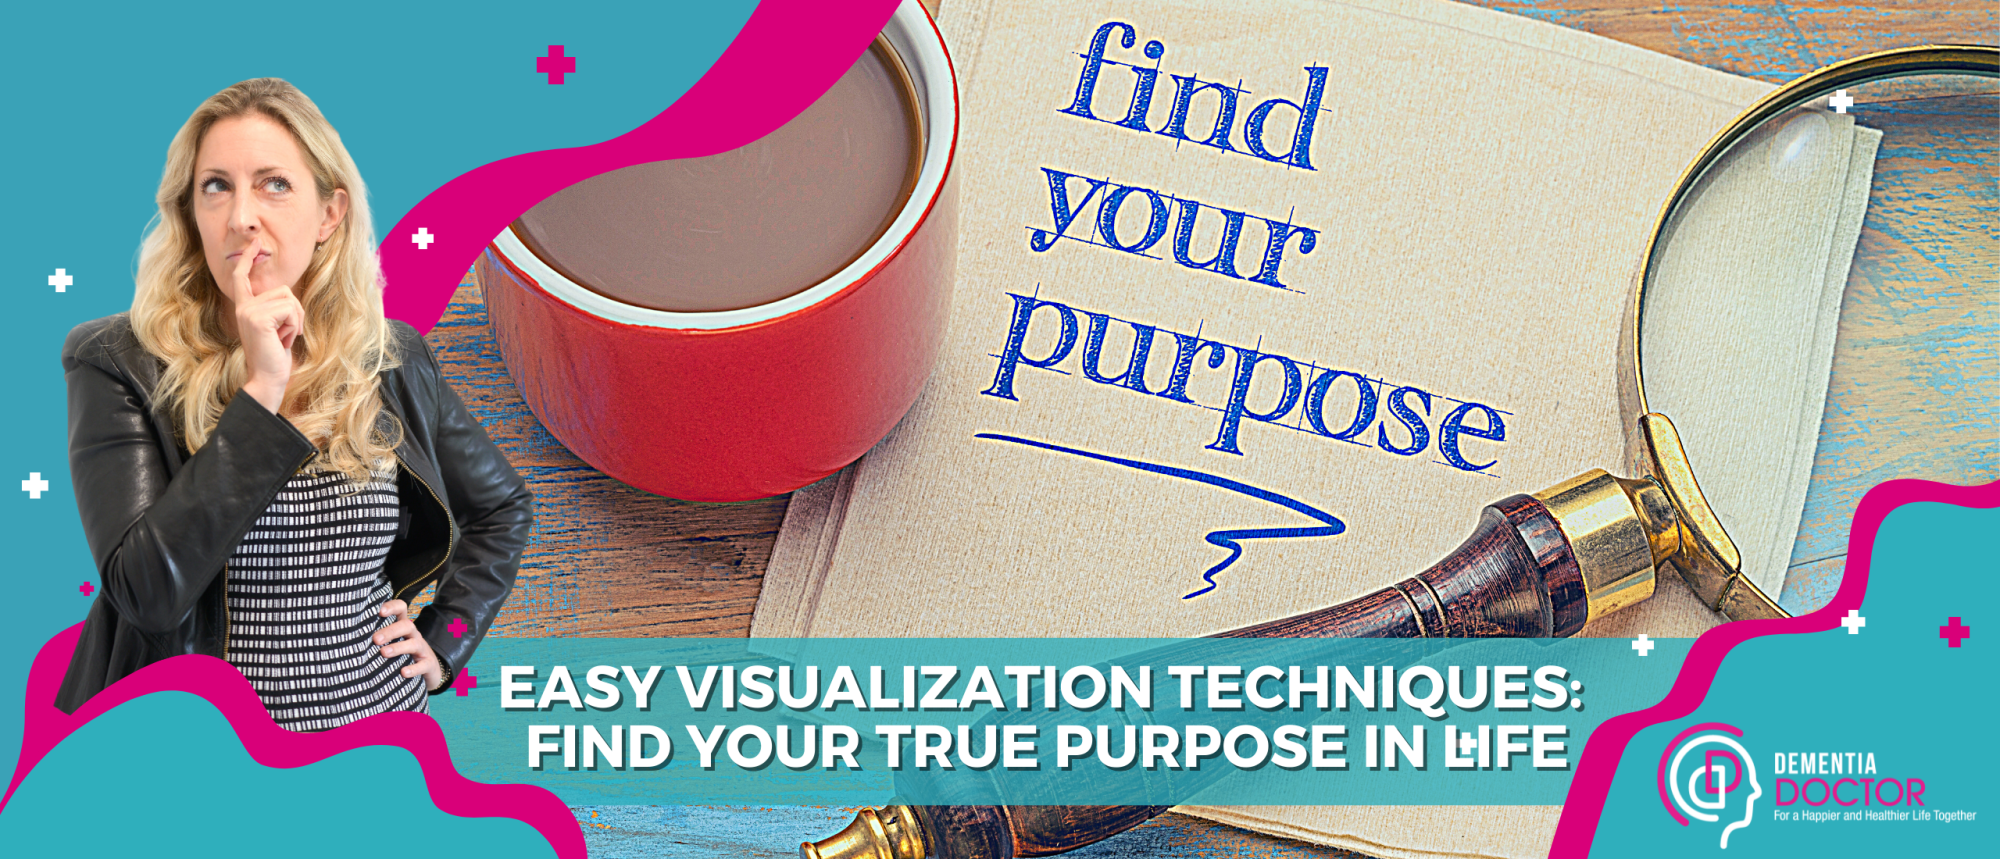 Blog Easy visualization techniques to help you find your true purpose in life